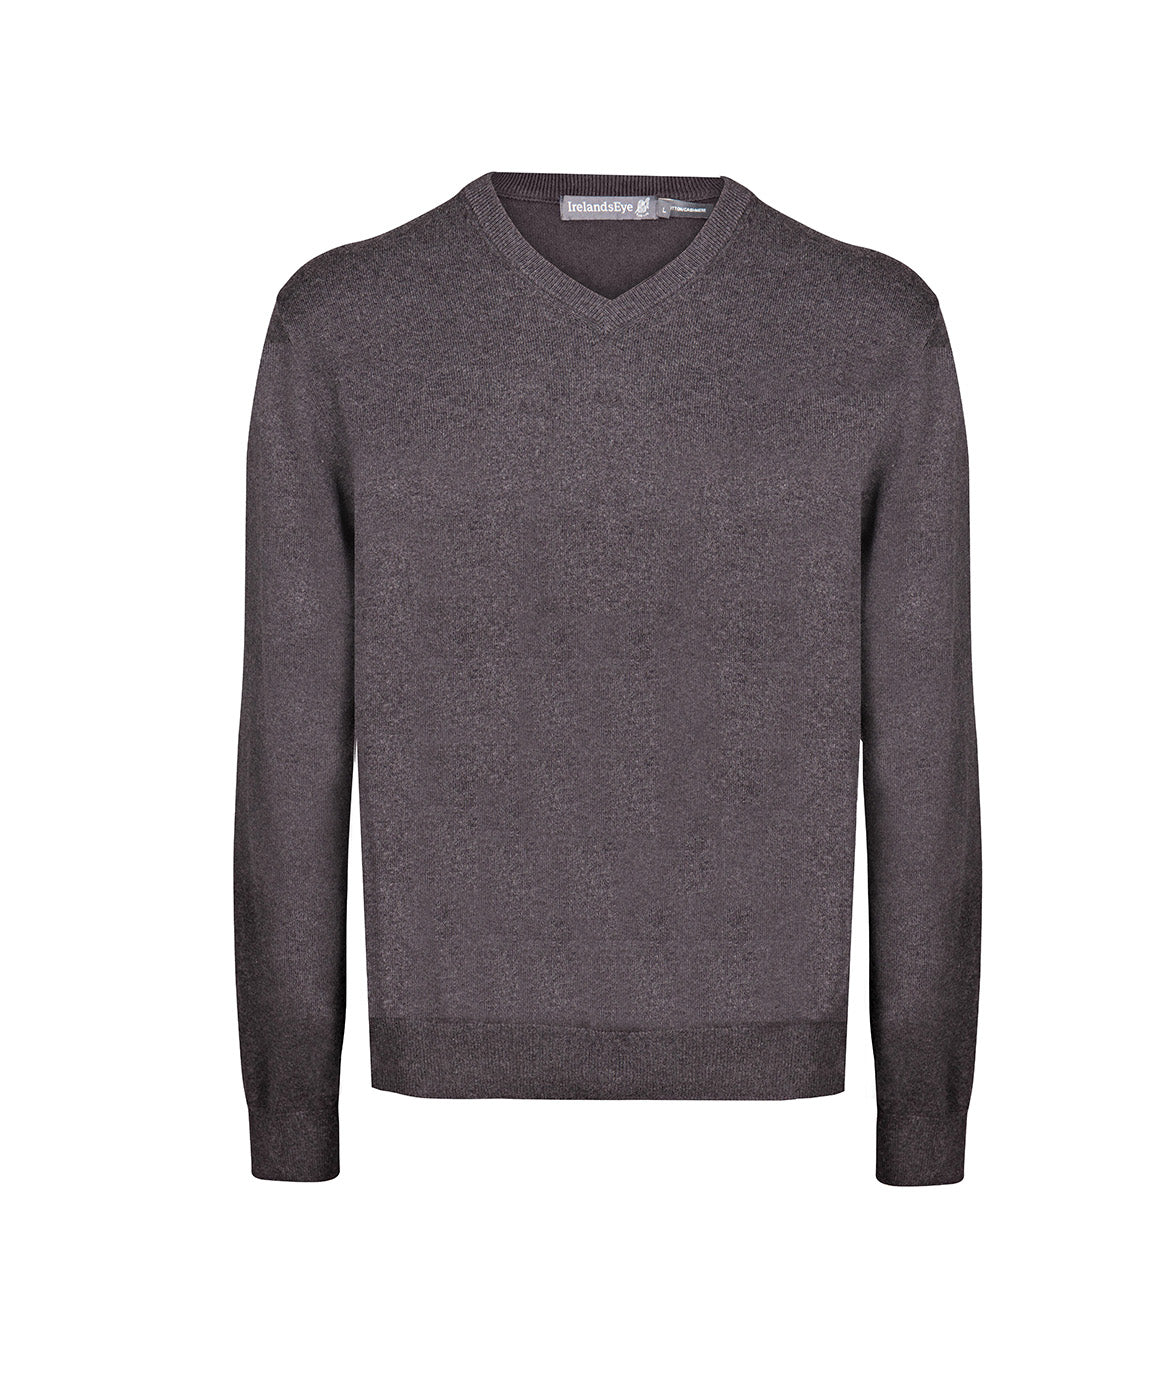 IrelandsEye Knitwear Mens knitted extra fine v neck sweater Charcoal